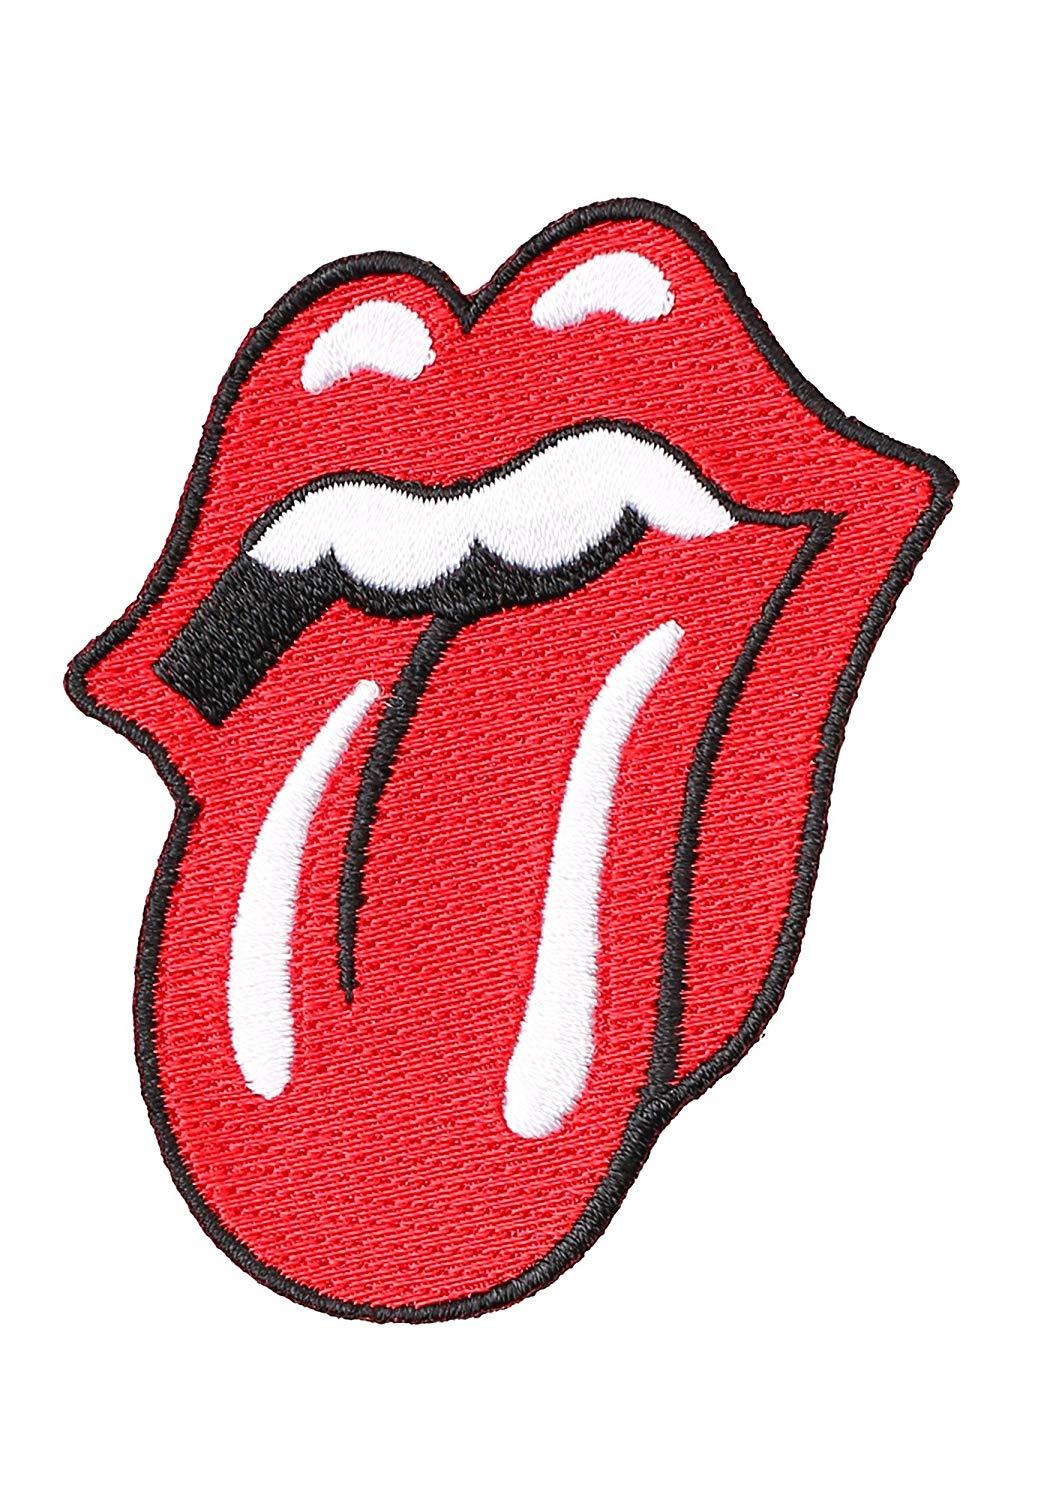 Red Lips and Tongue Logo - Rolling Stones Tongue Logo Patch Standard: Clothing